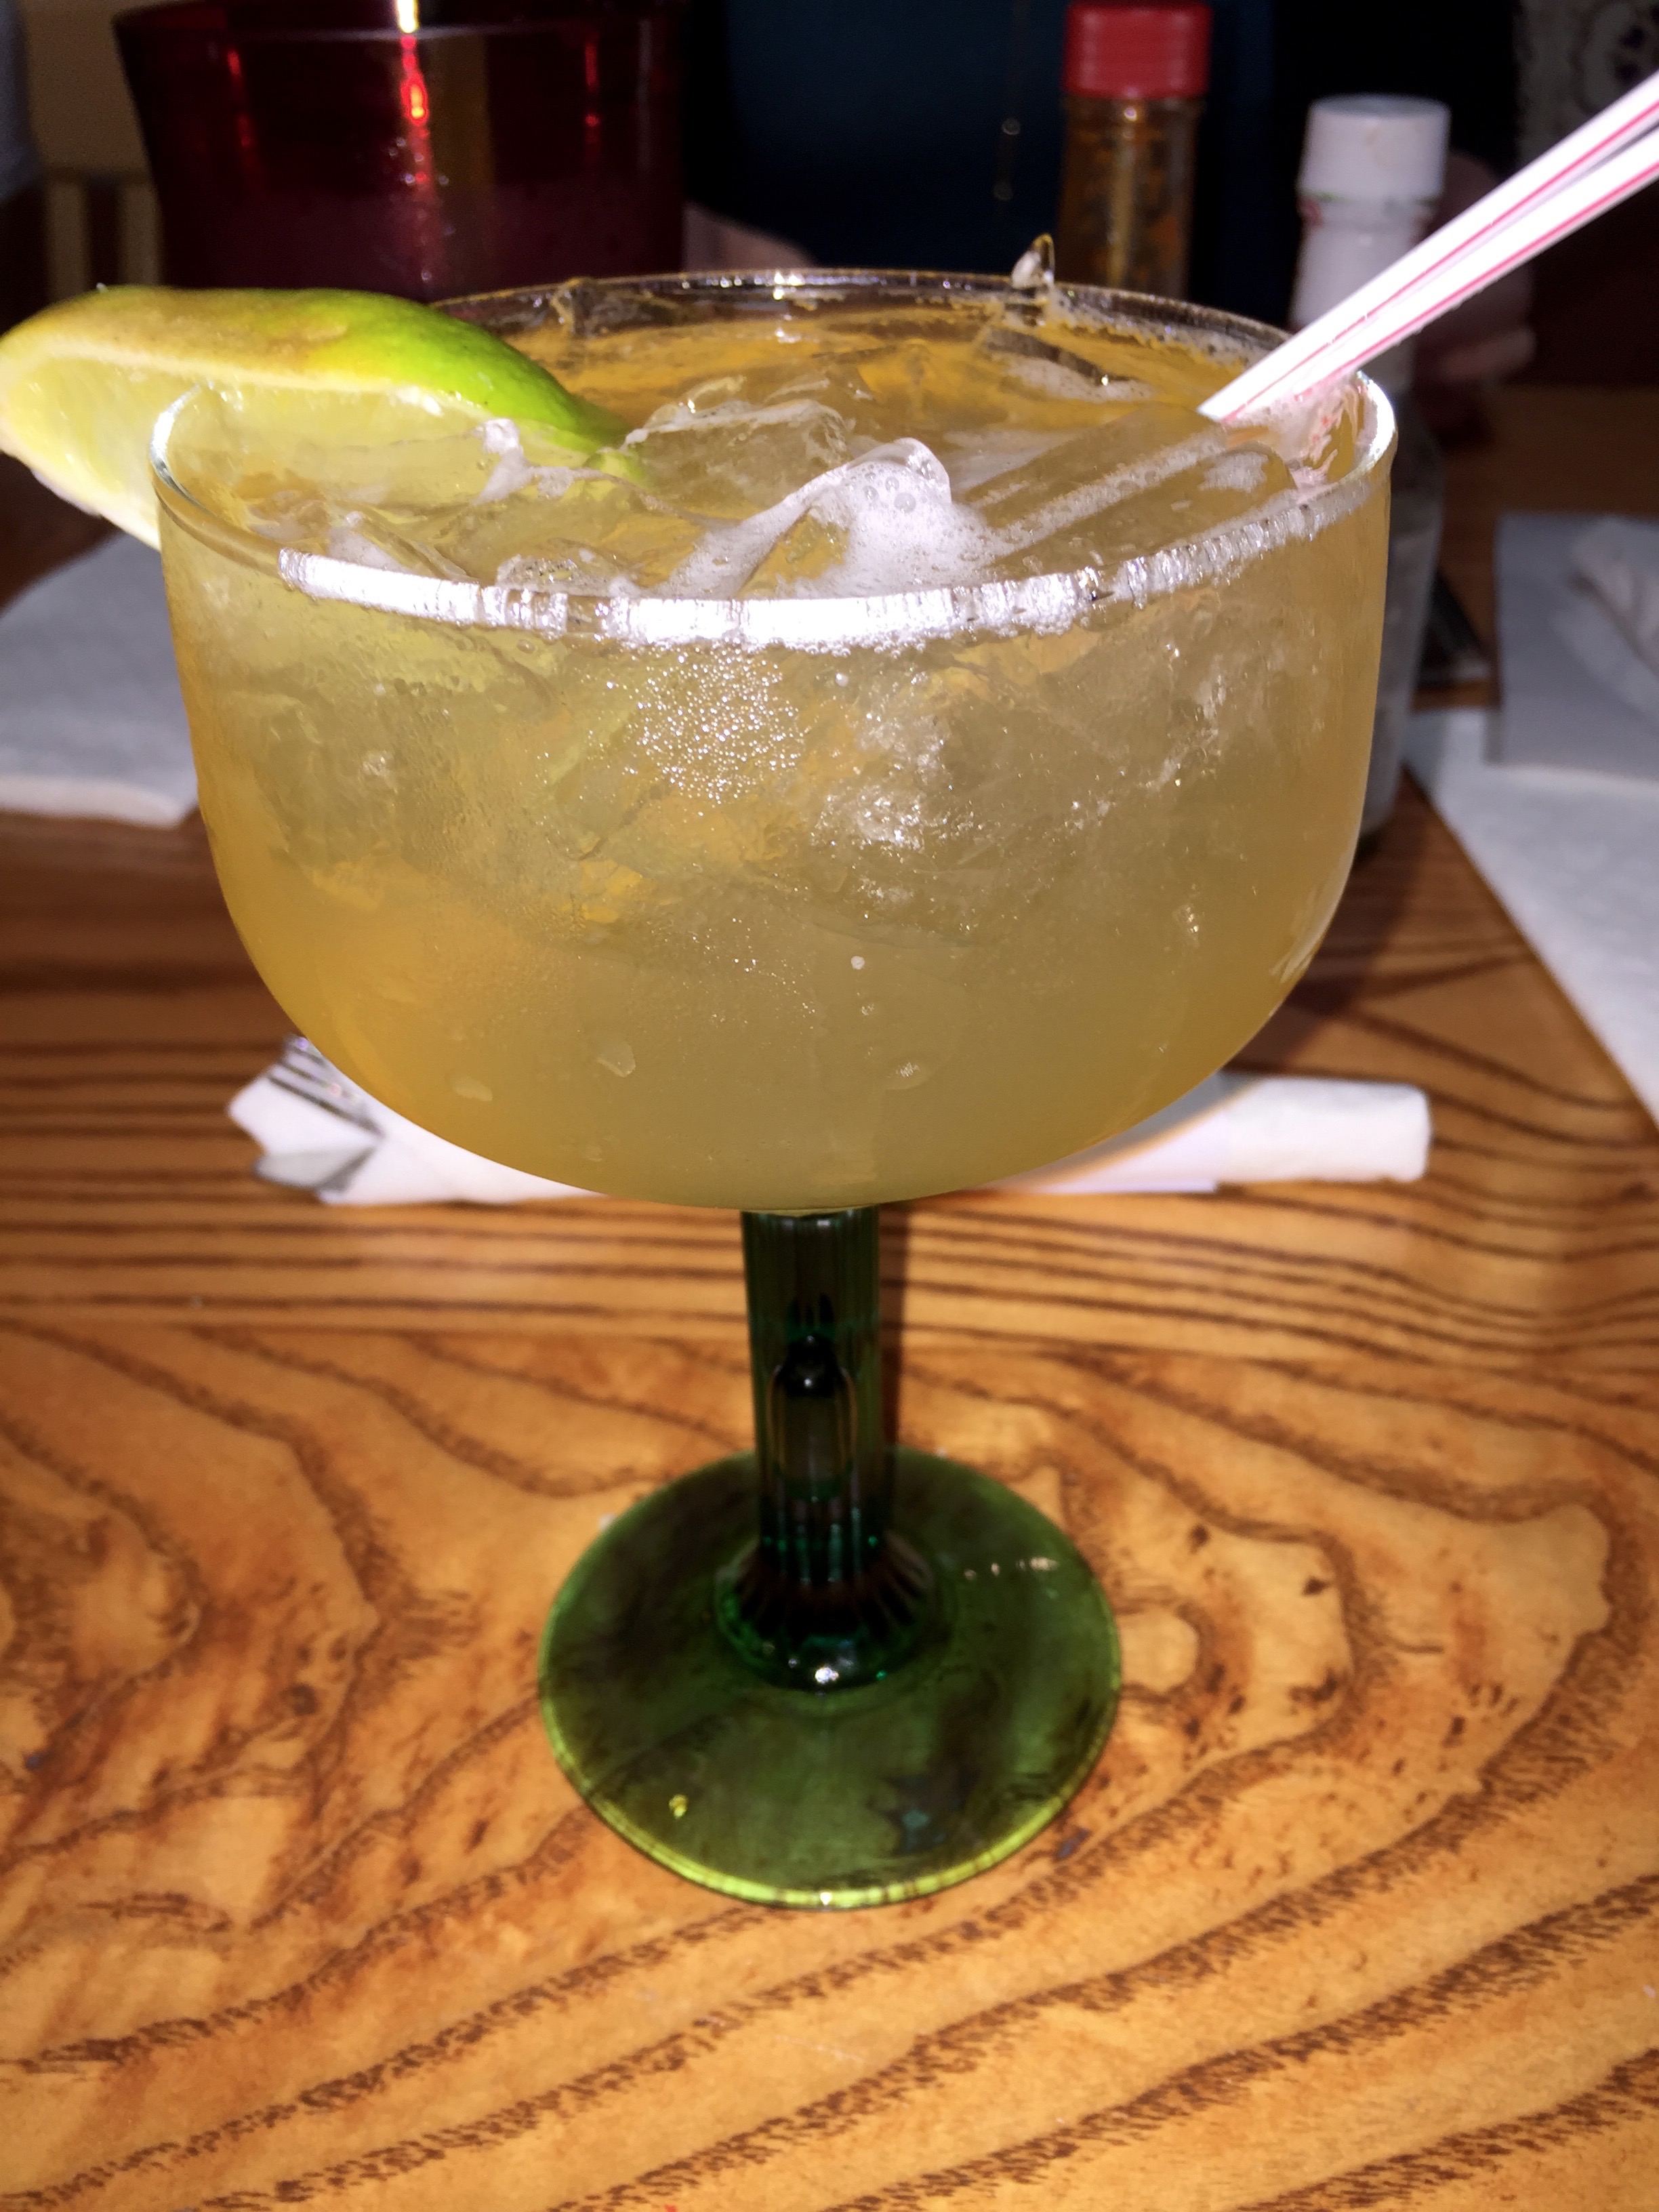 The Best Margarita in Town - Page 5 of 13 - One Man's Quest to Find The